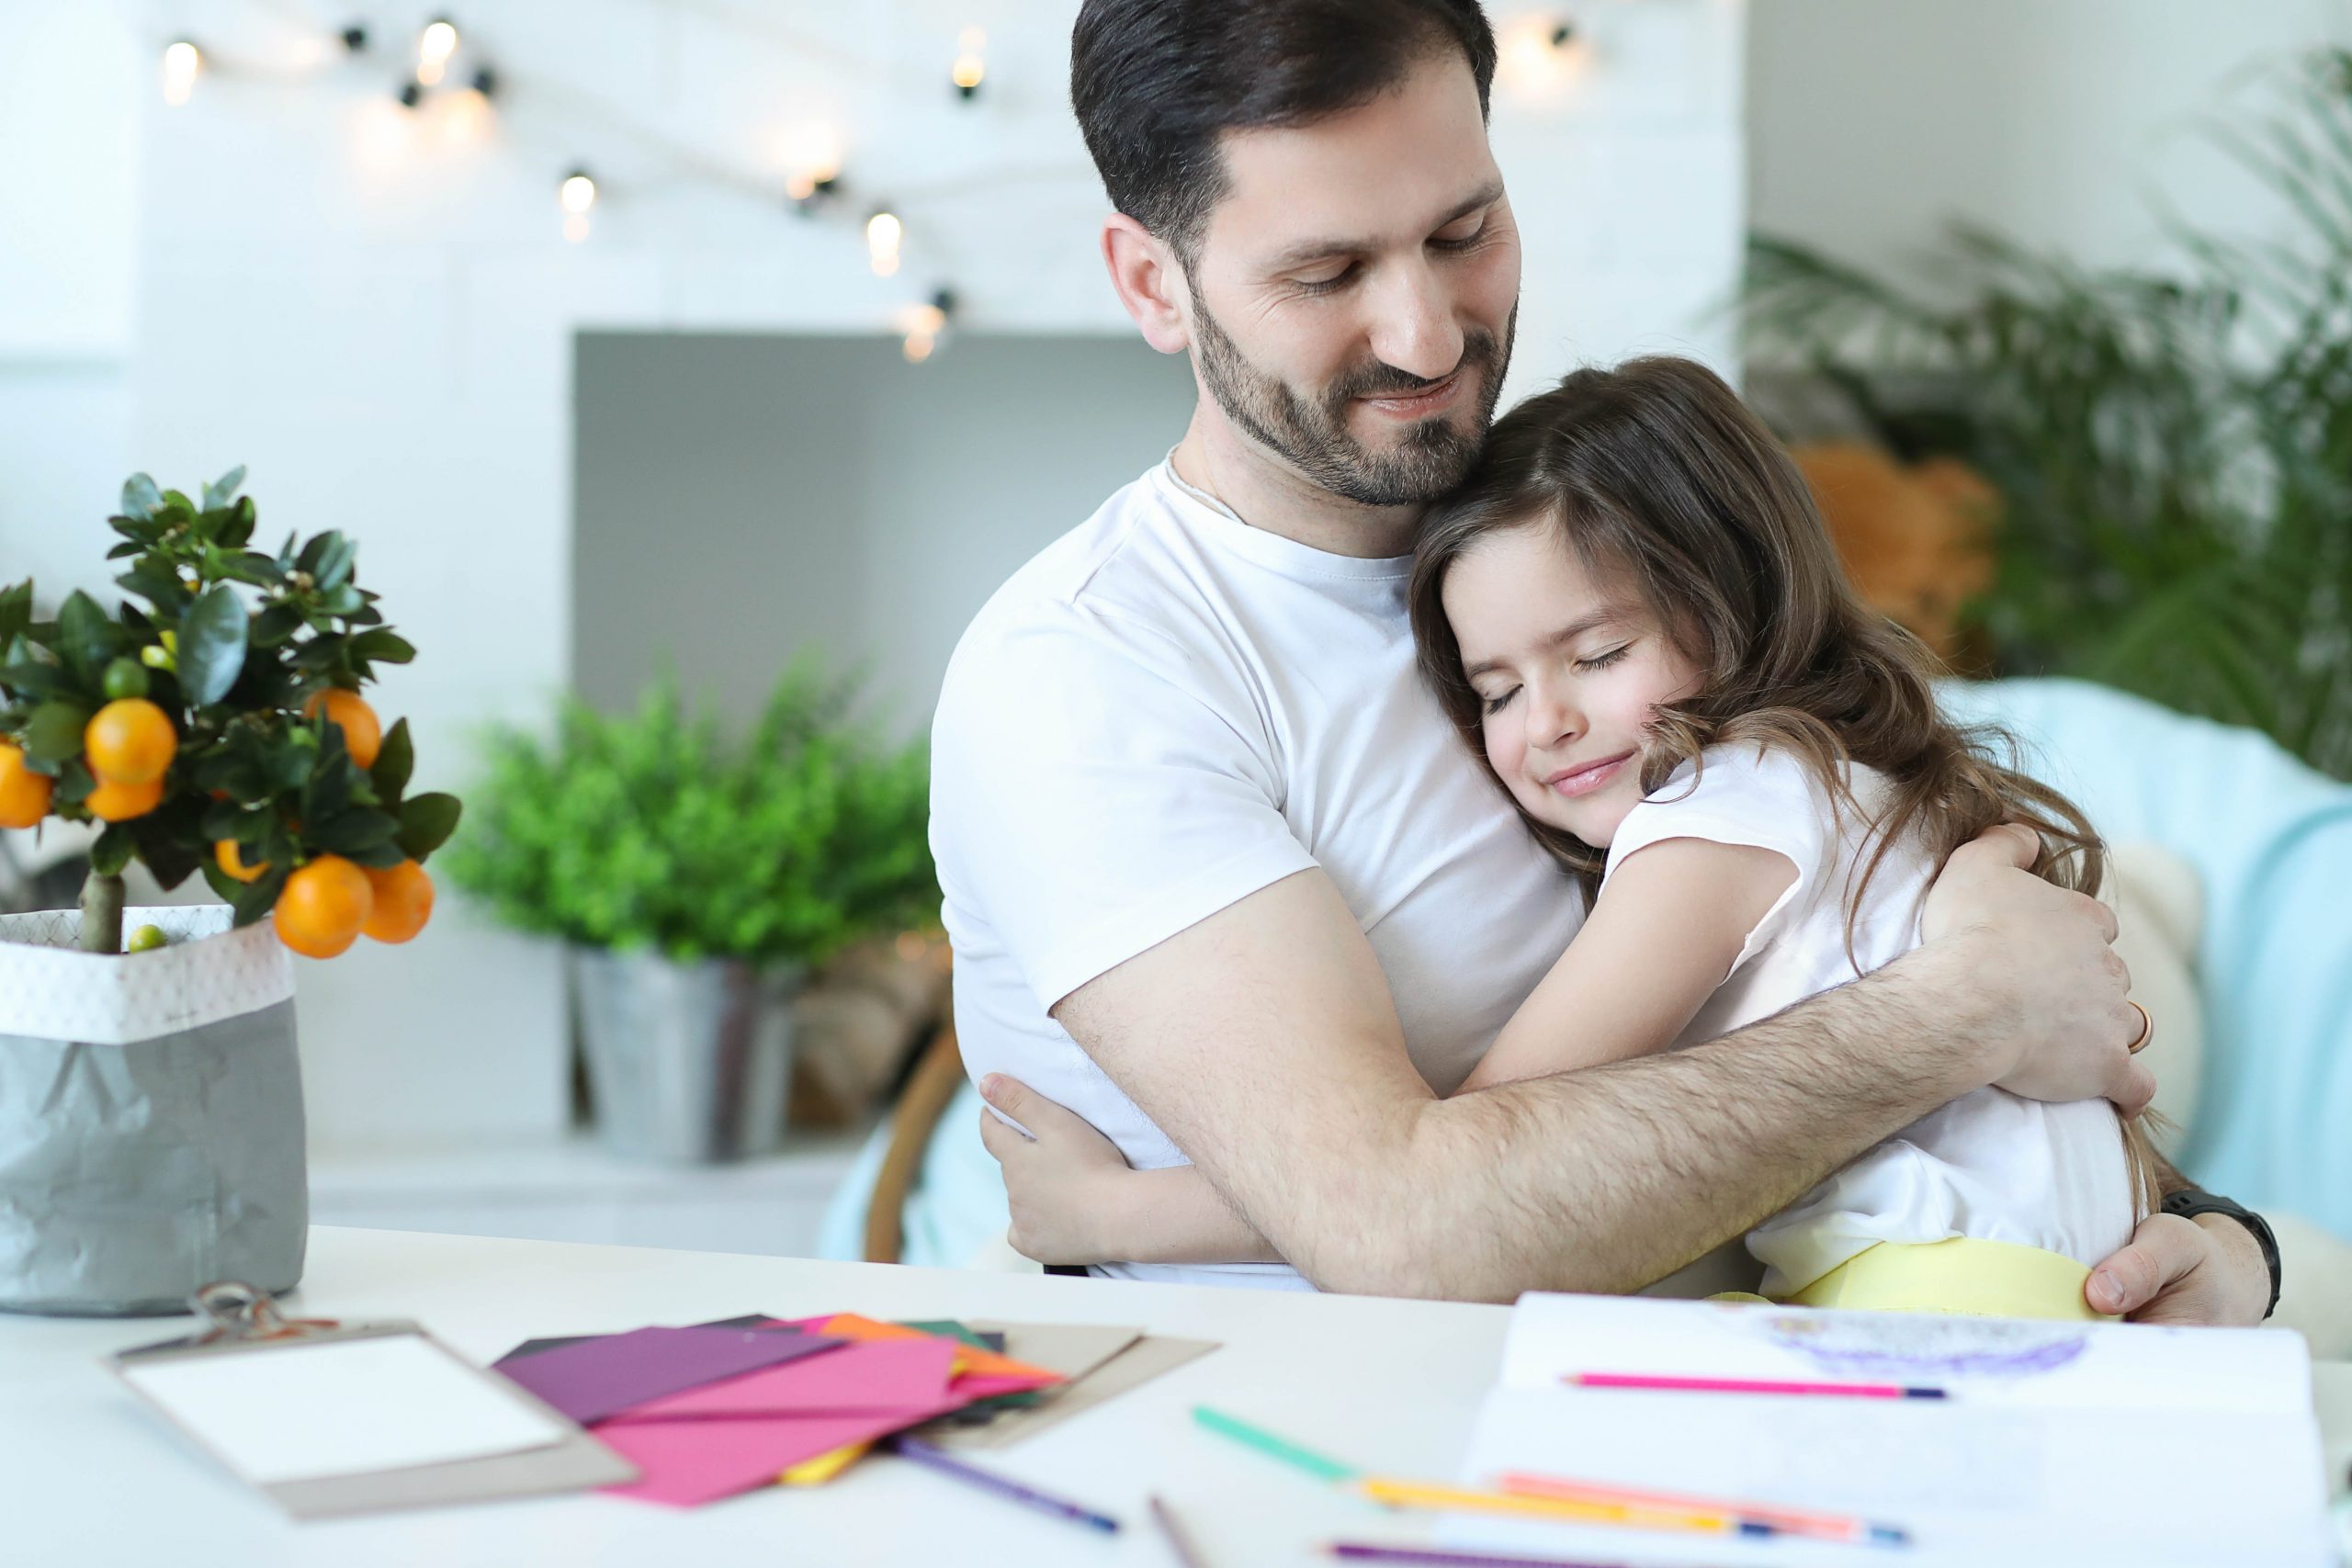 Affectionate father hugging young daughter, joyful expressions; creative art supplies scattered on table.